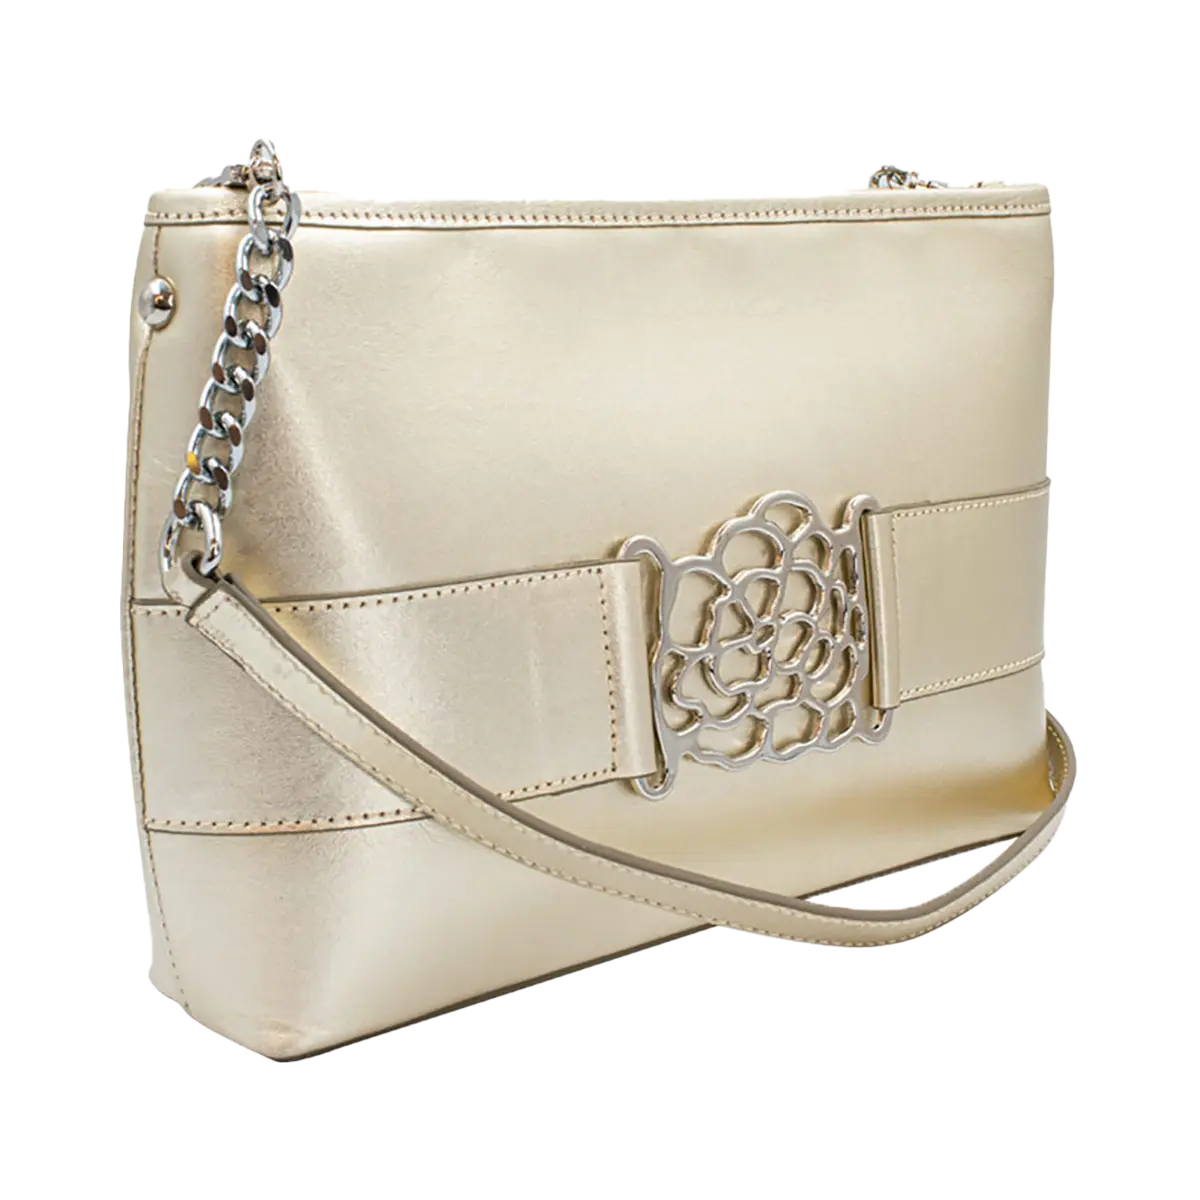 small light gold leather shoulder bag with metal accent. Fashion accessory for women in San Diego, CA.